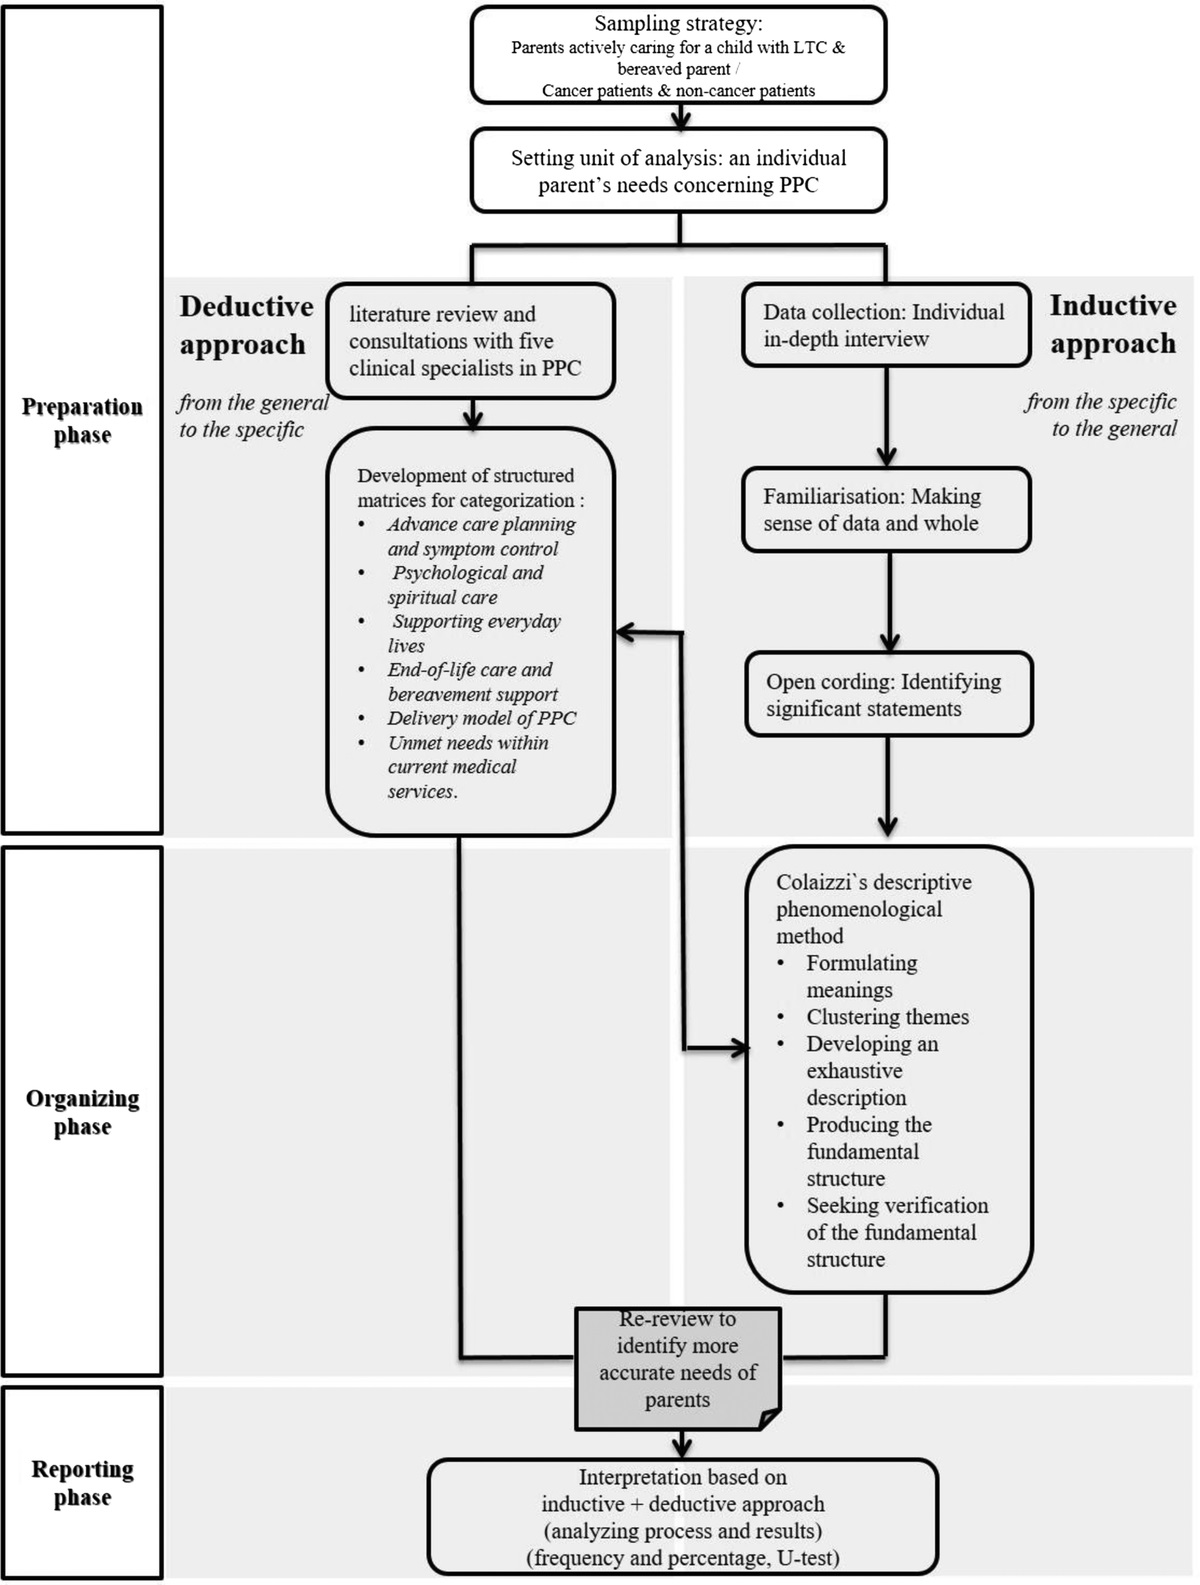 Content Analysis of Multifaceted Needs for Improving the Quality of Pediatric Palliative Care Among Parents of Children With Life-threatening Conditions